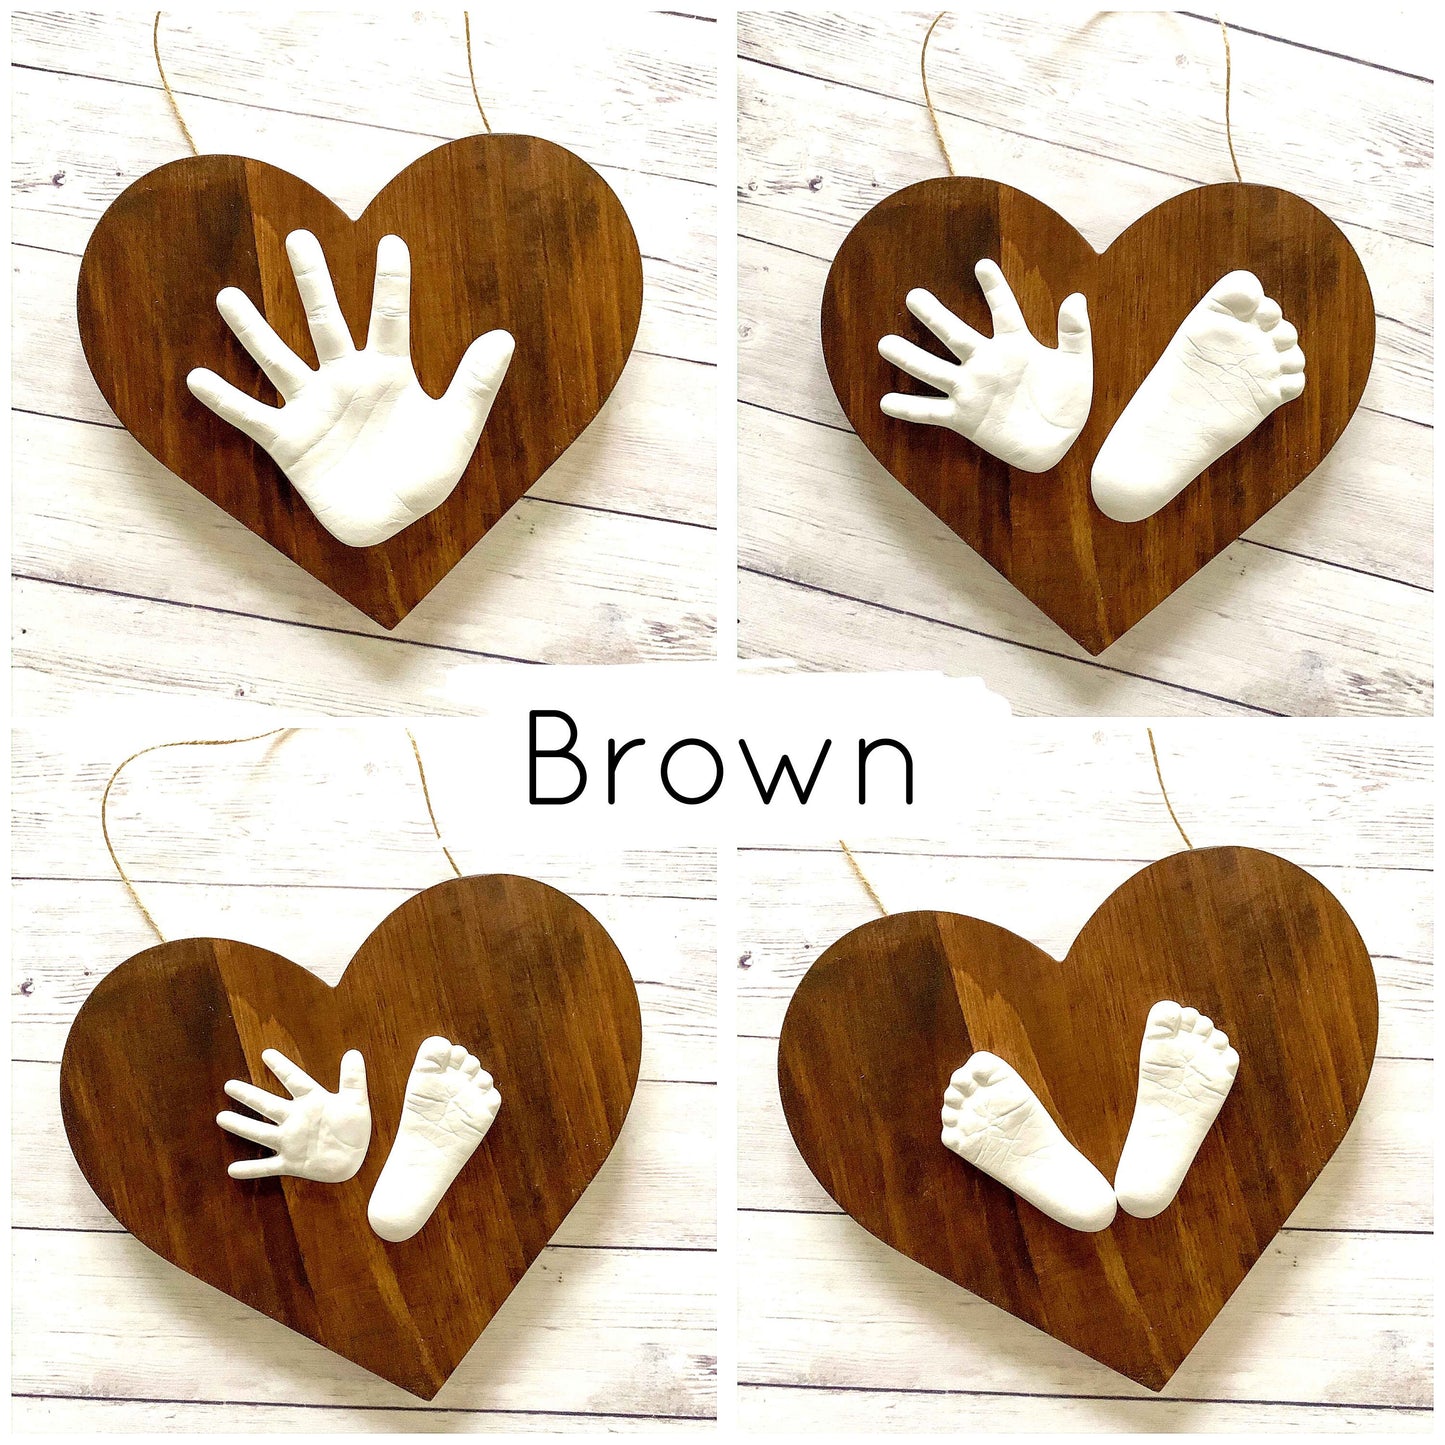 9" wooden heart plaque casting kit for baby 0-24 months